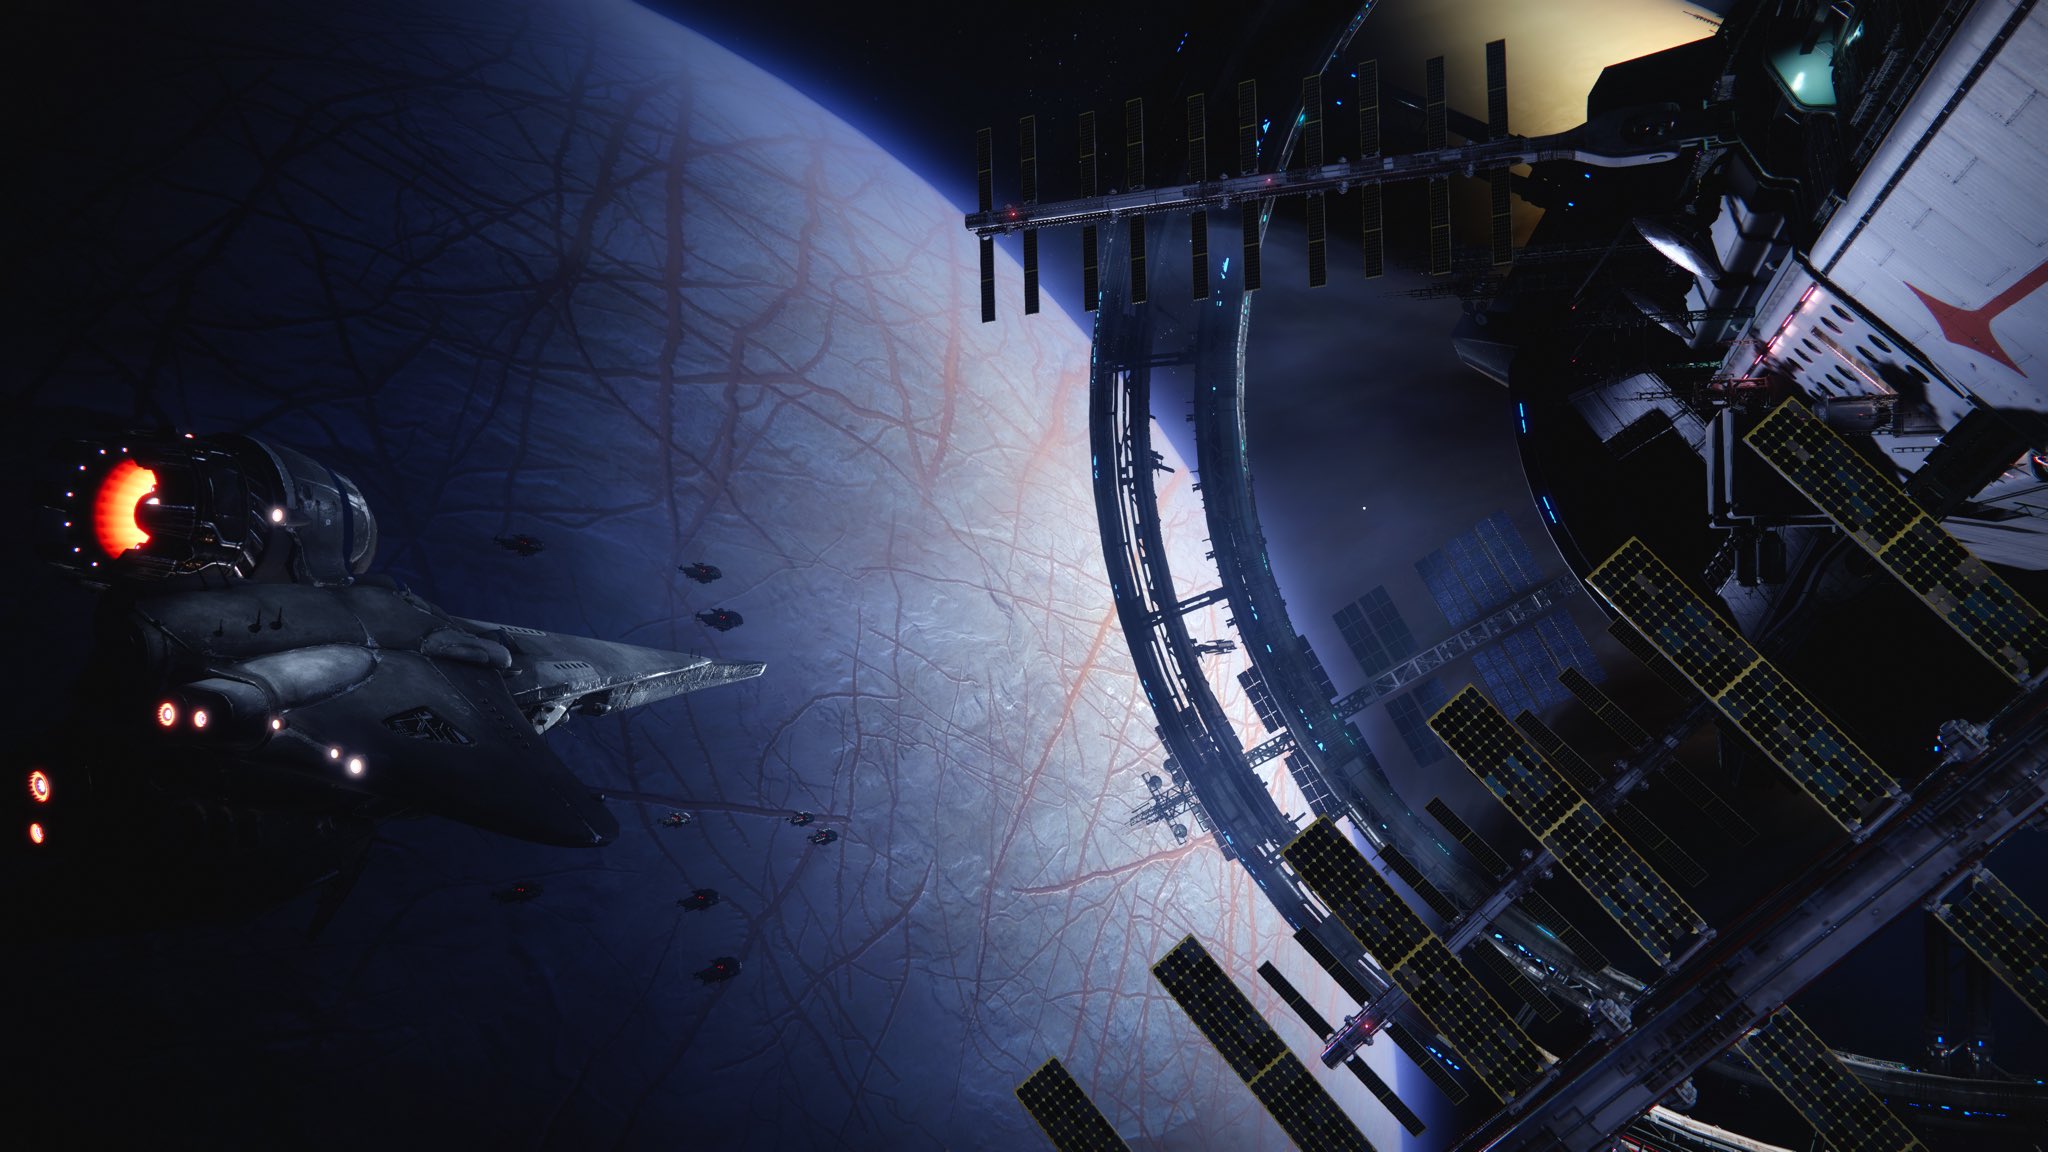 Destiny 2 Needs More Missions In Space